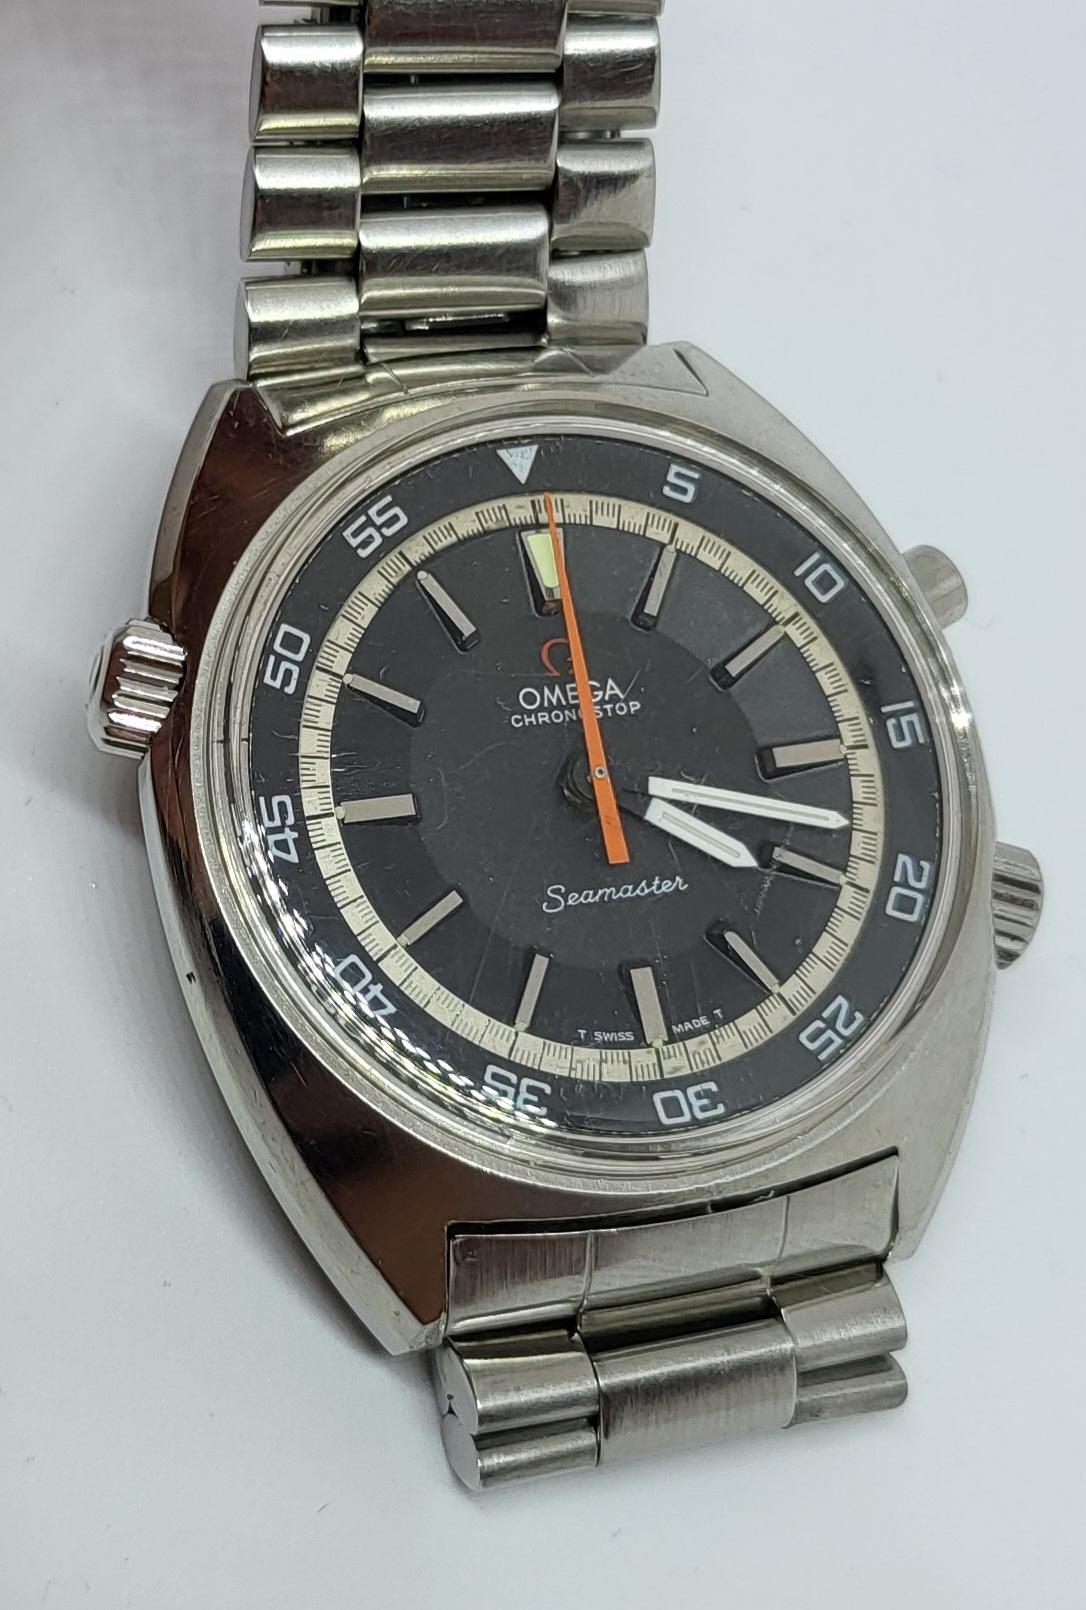 Omega Seamaster Chronostop 145.008 cal.865 Wrist Watch

GOOD CONDITION

MOVEMENT: automatic with manual winding, caliber 865

FUNCTIONS: hours, minutes, chronograph

CASE: stainless steel, diameter 41 mm x 47 mm, height 13 mm, mineral glass, screw